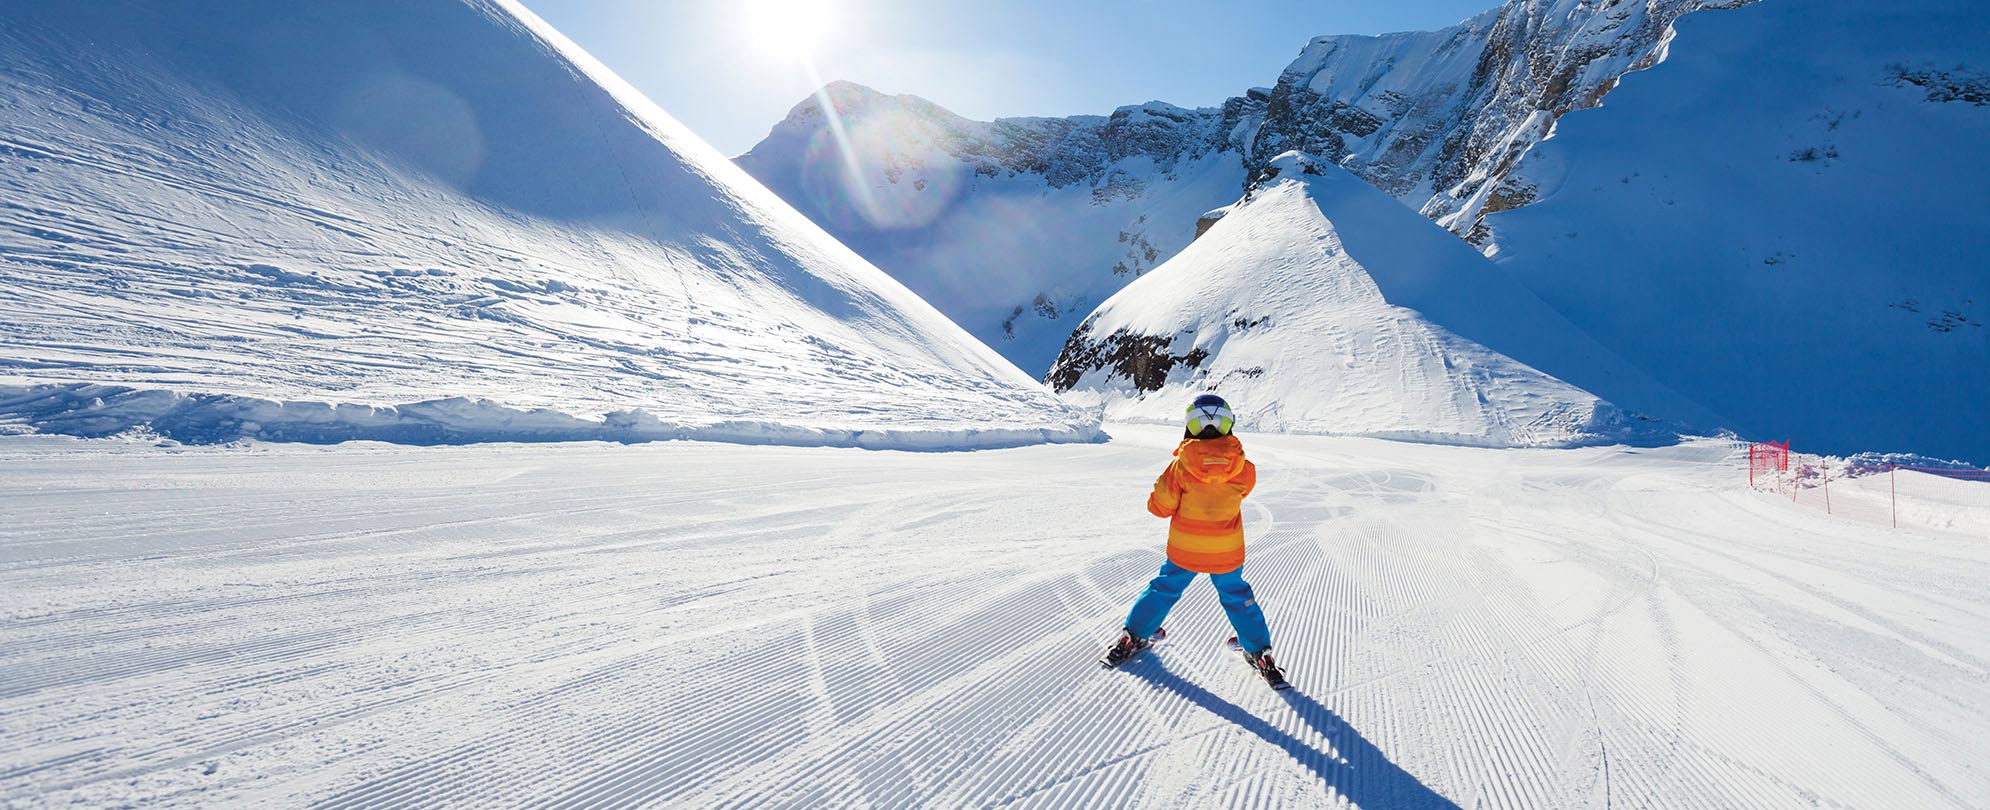 A kid in a bright orange jacket skiing down a freshly groomed ski slope on a sunny day